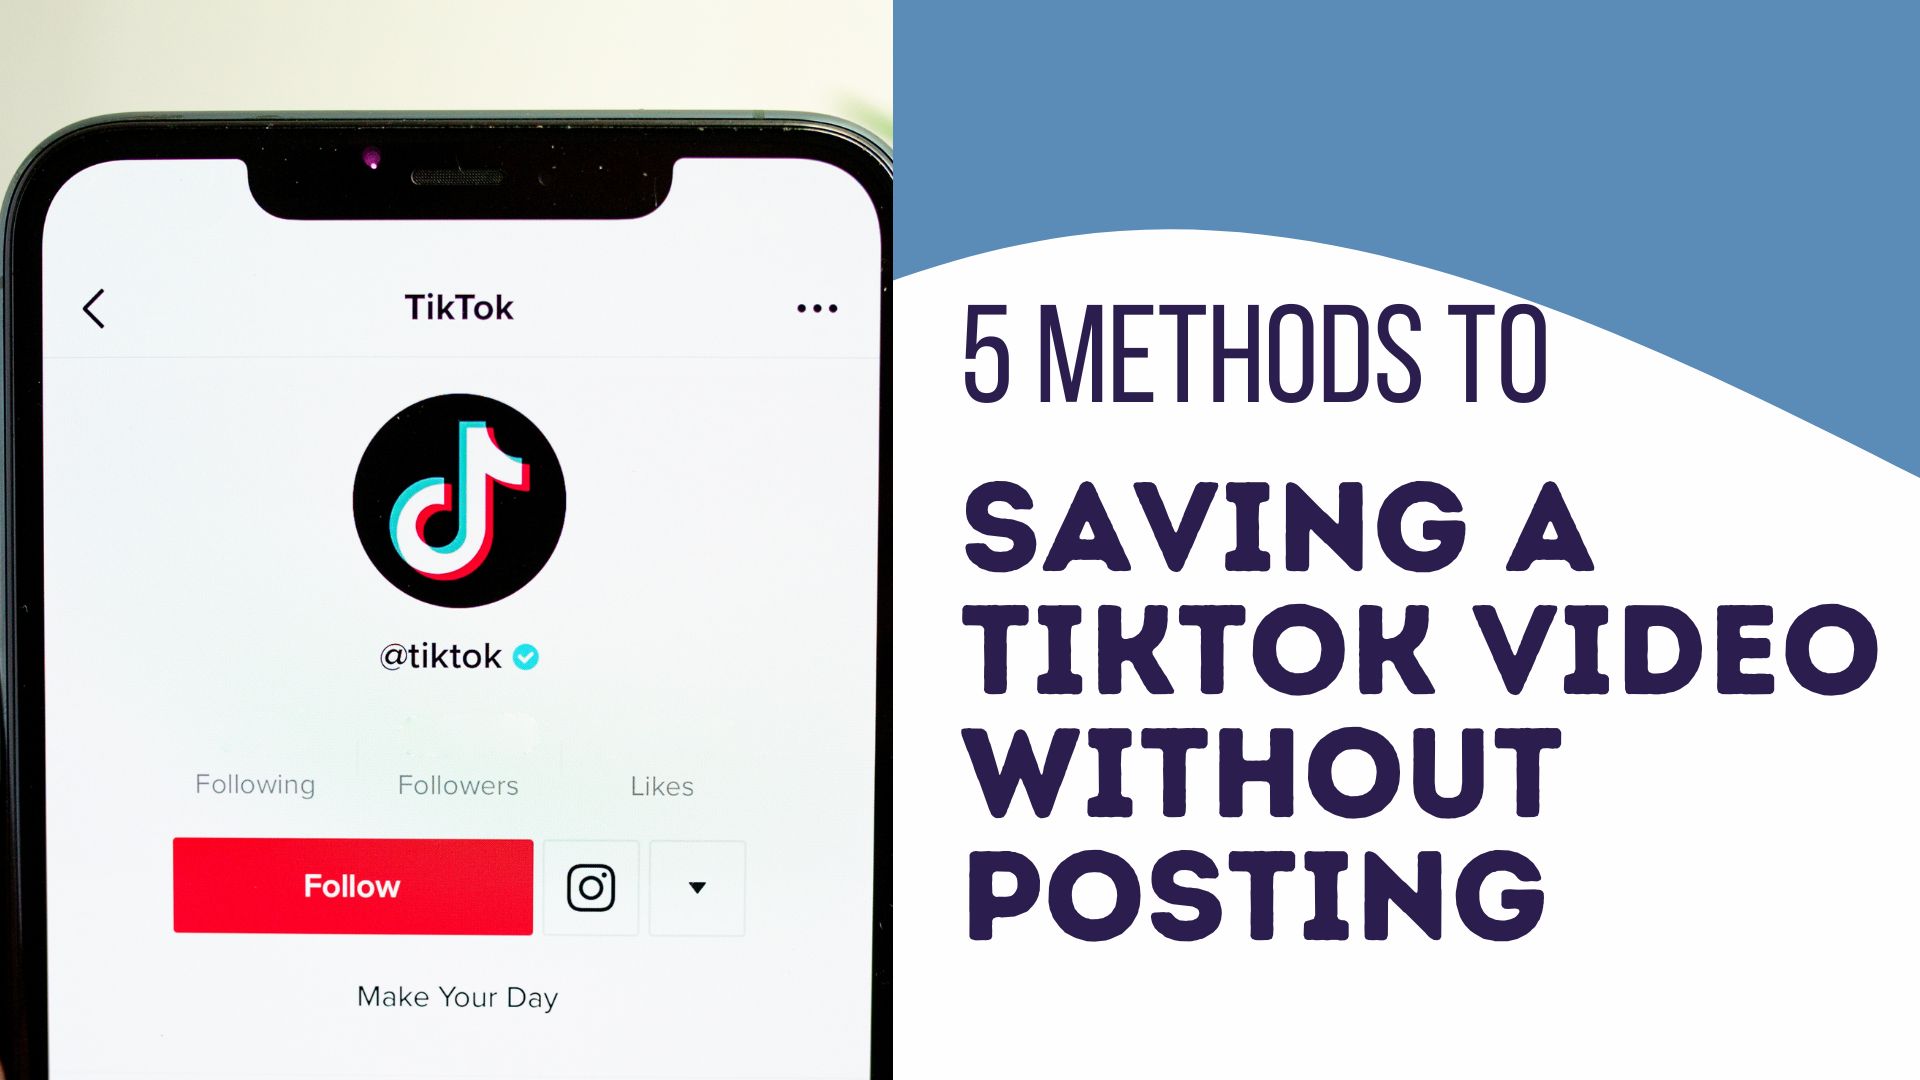 How to Save TikTok Without Posting: The Ultimate Guide (5 Easy Methods)